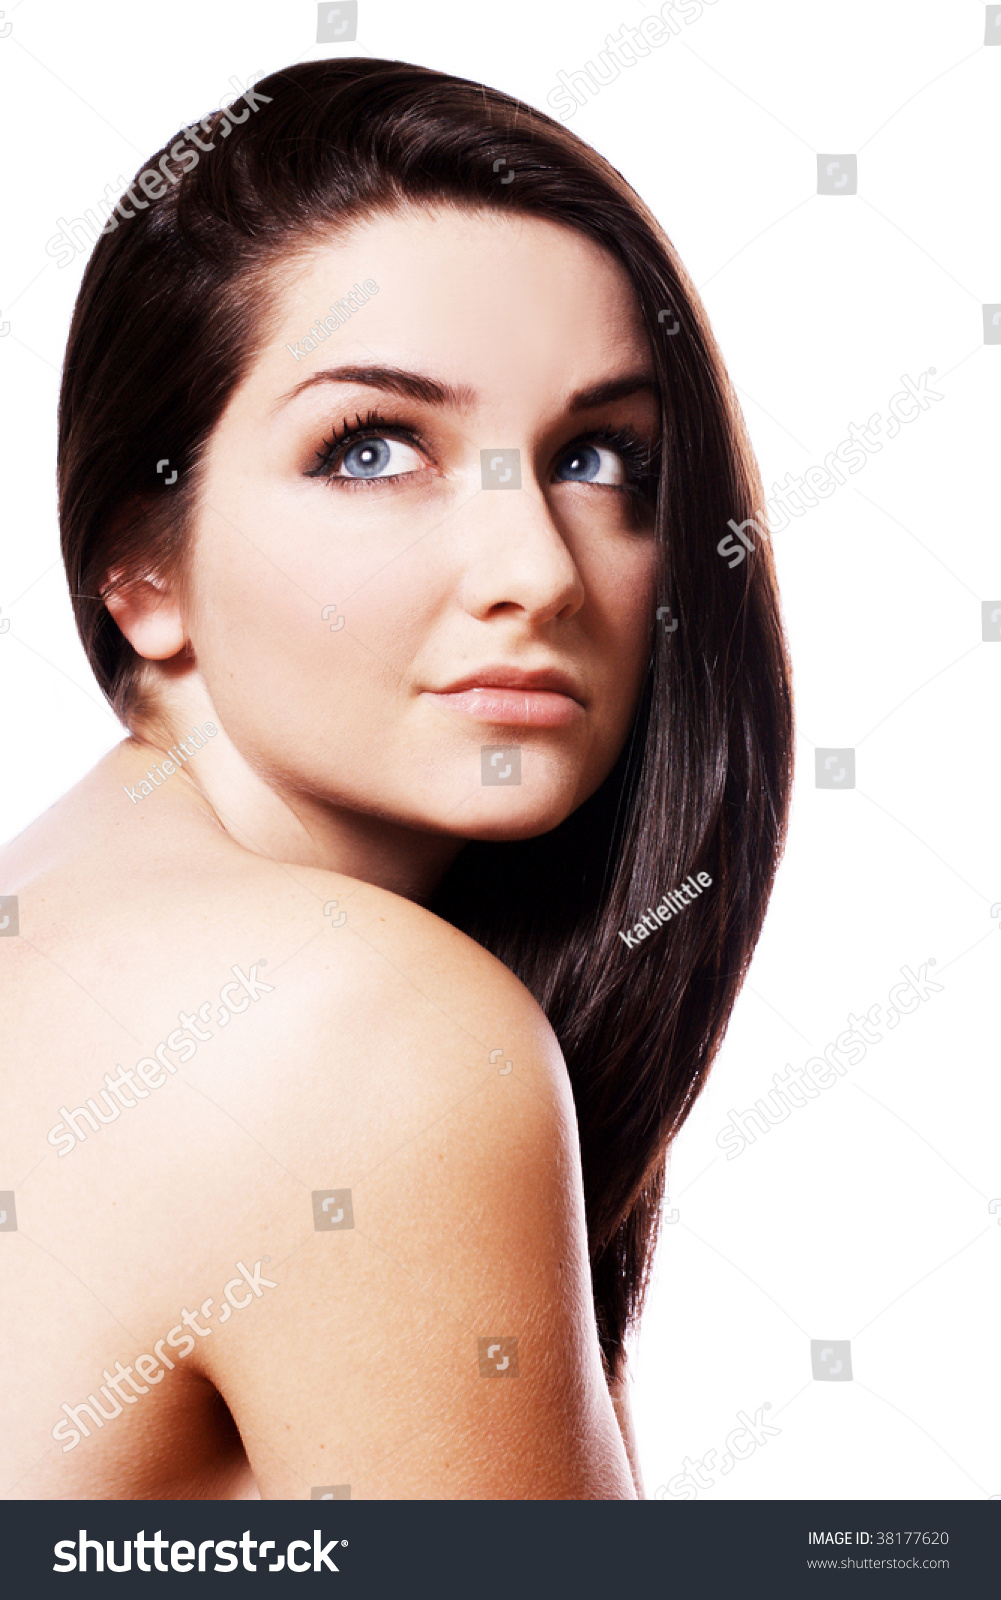 A Beautiful Young Woman In Front Of A White Background. Beauty Shot ...